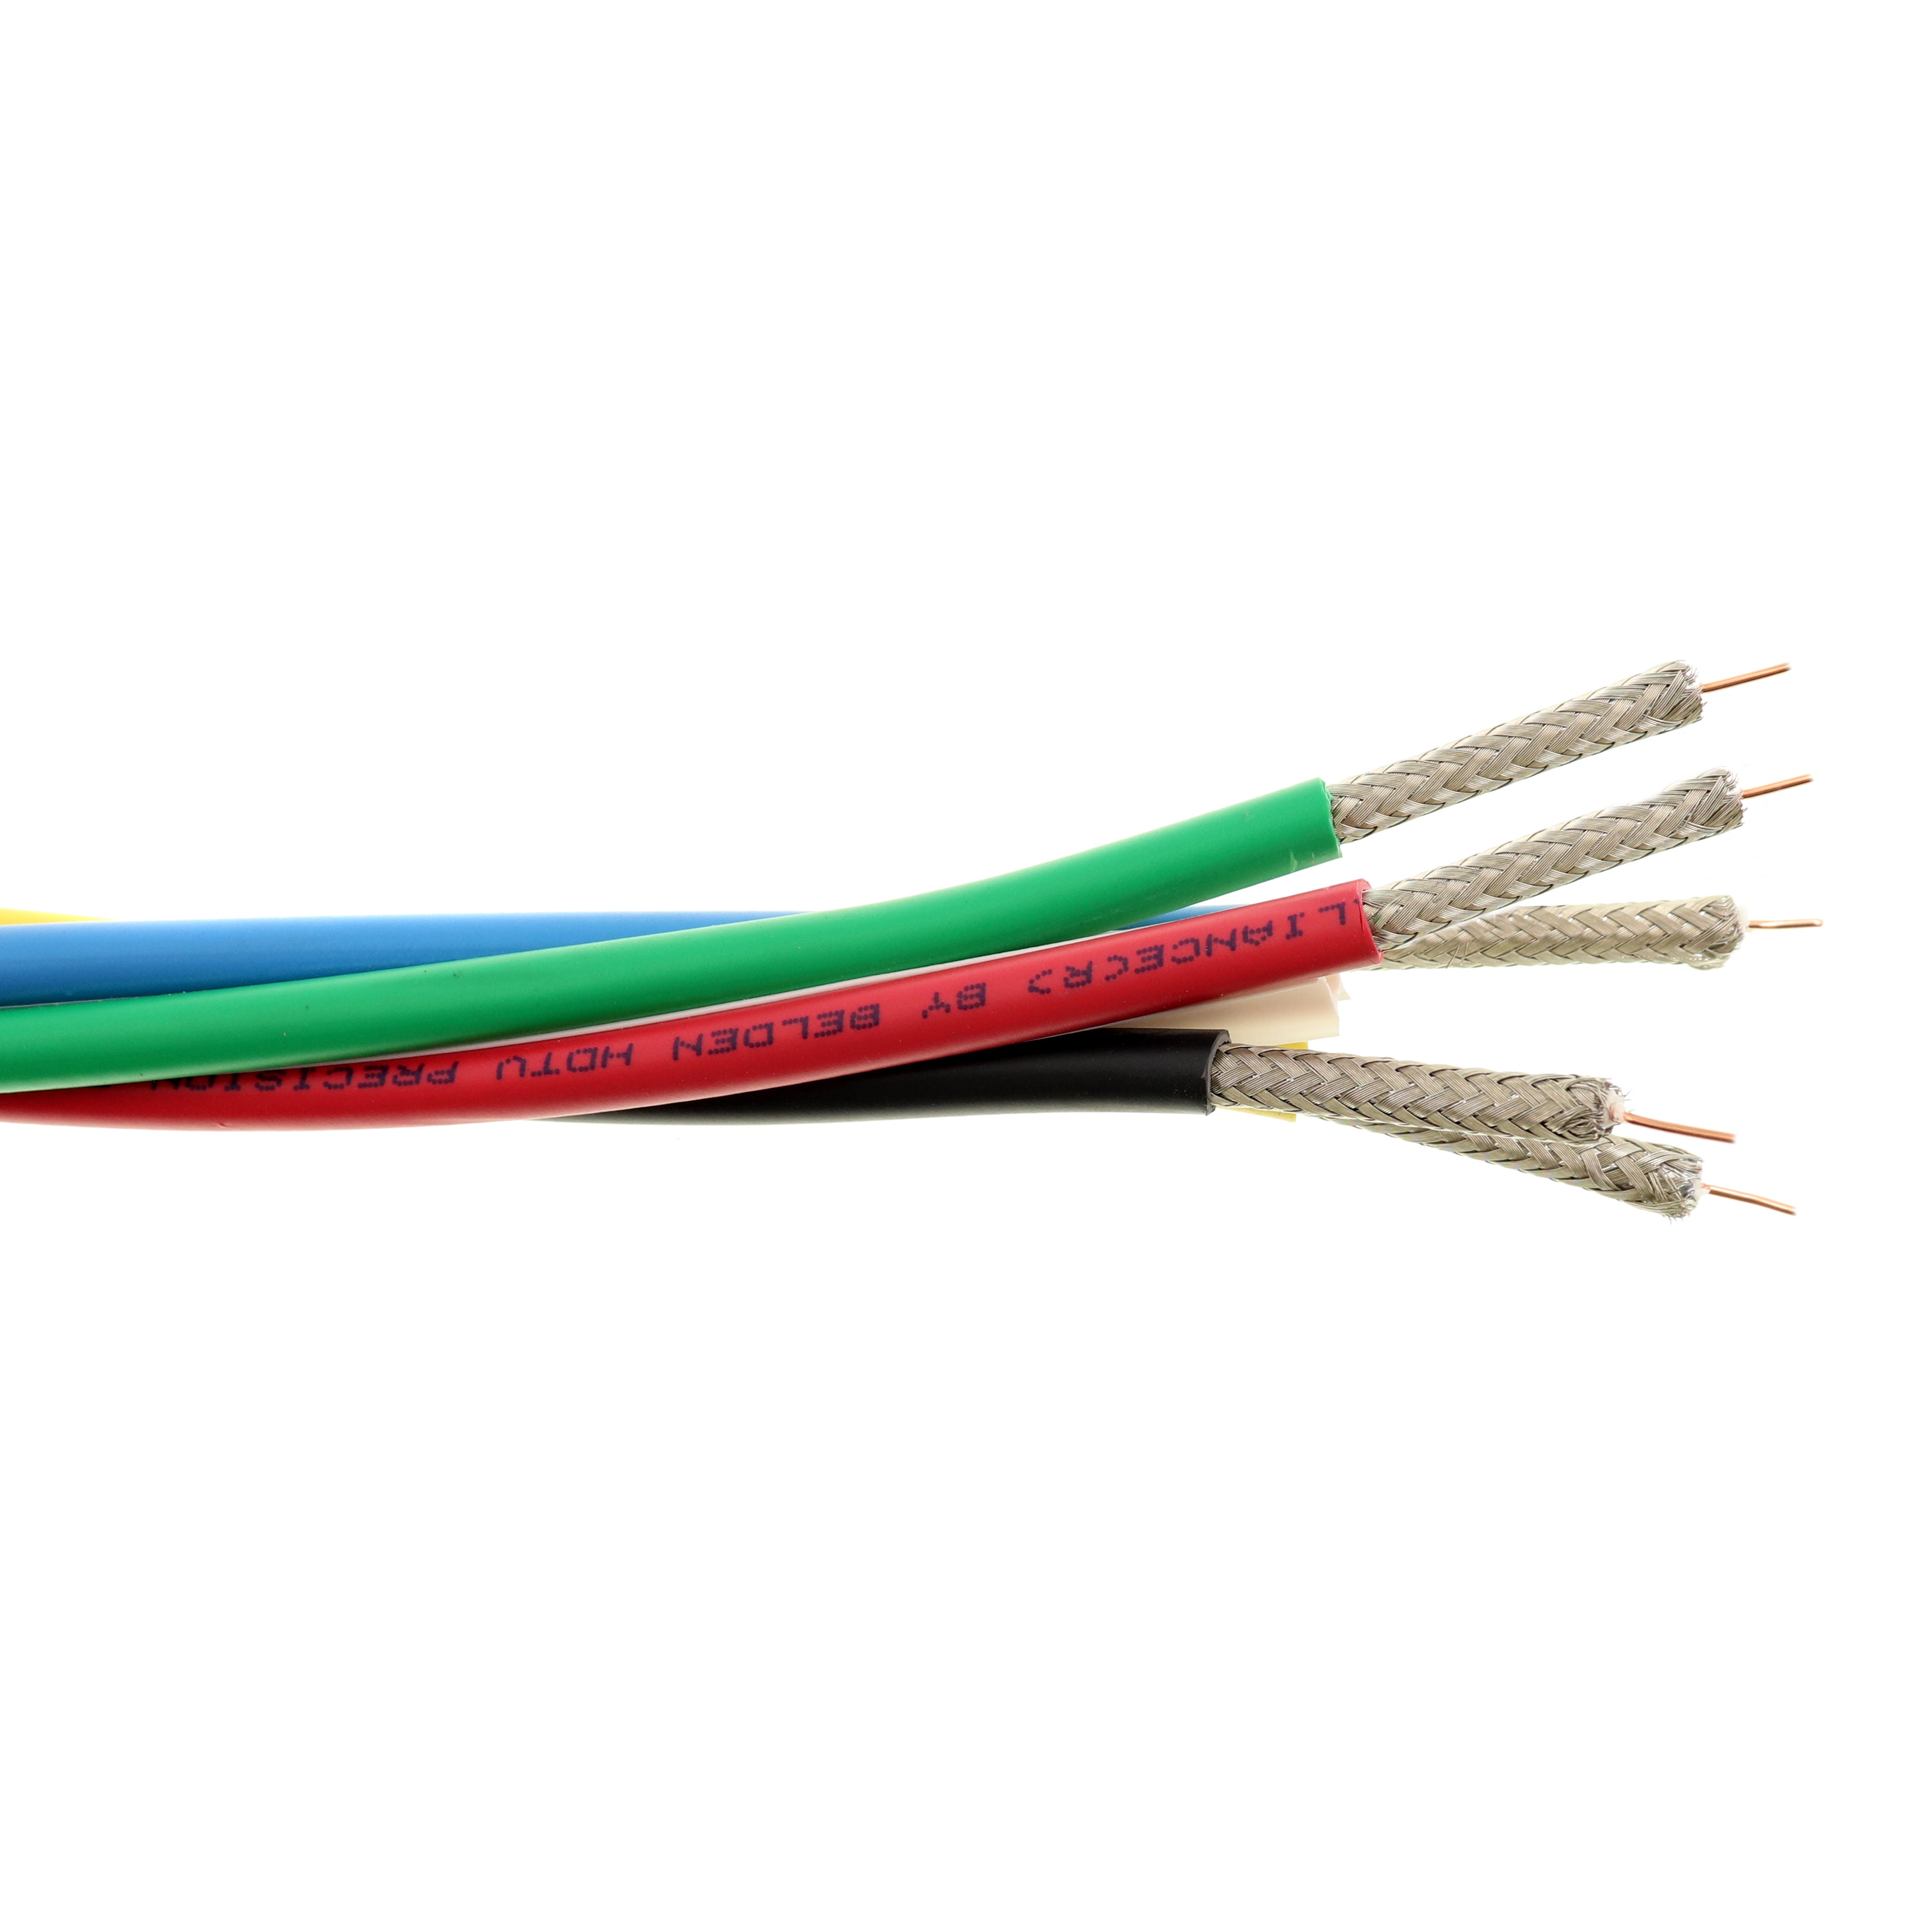 Belden, BELDEN 1505S5 BRILLIANCE RGB SNAKE CABLE, 5-COAX RG59/ SDI VIDEO CABLE, CMR, 100